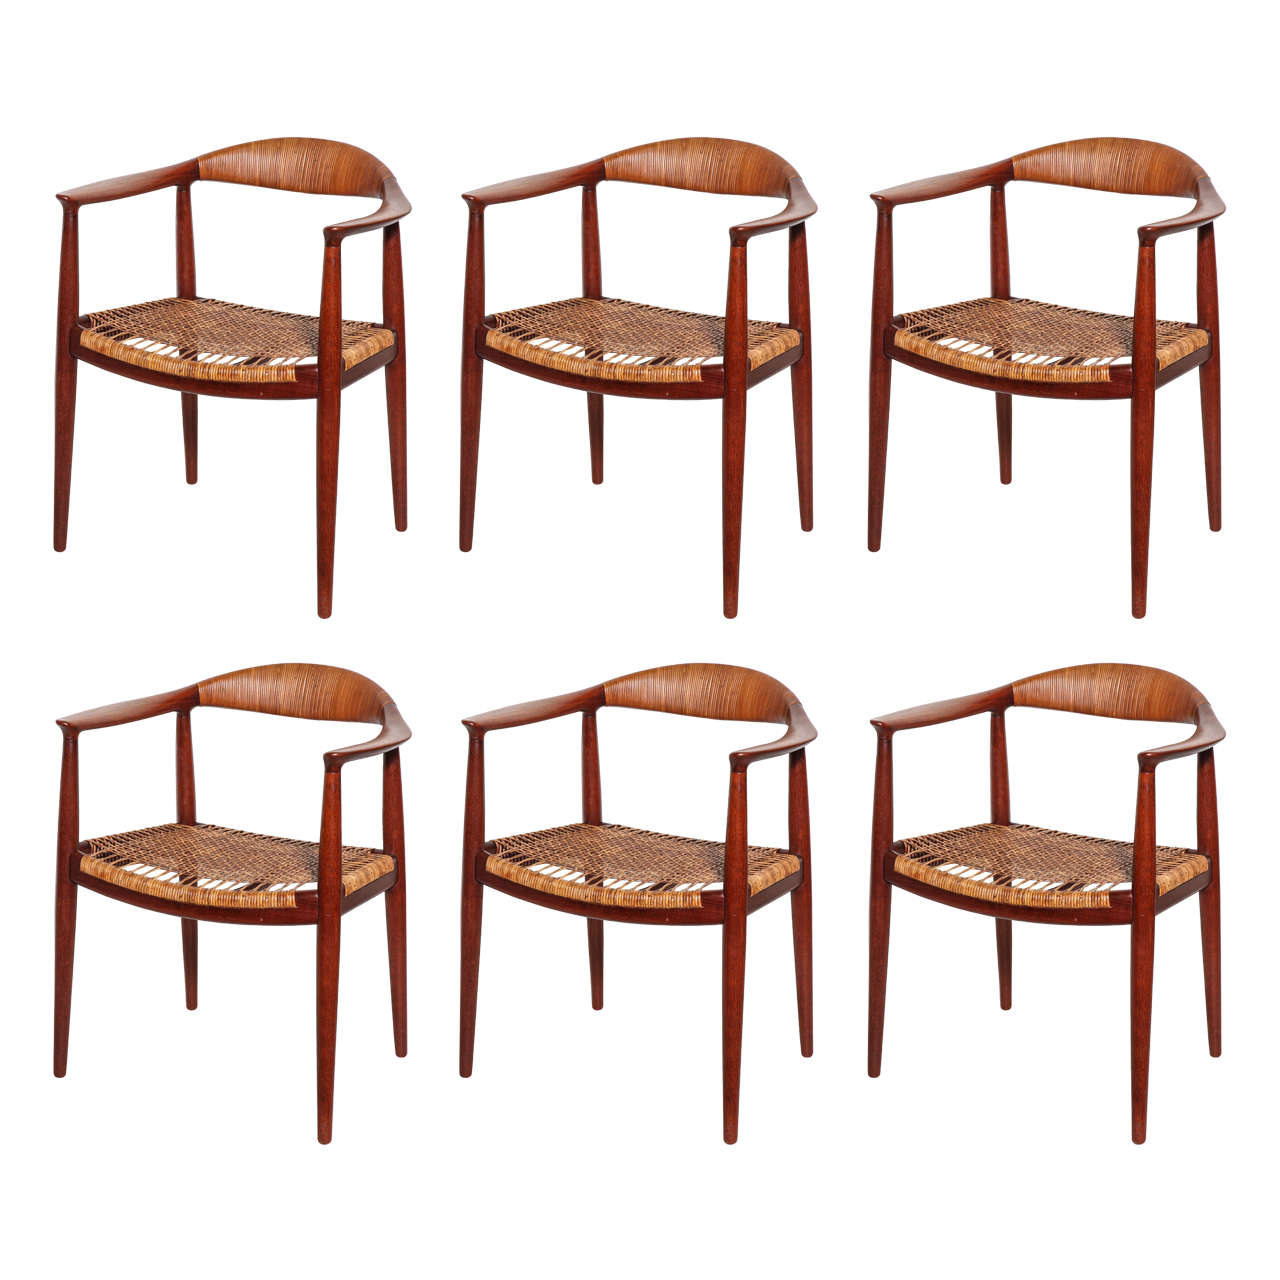 "The Chair" No. 501 in Teak and Cane by Hans Wegner, Set of Six